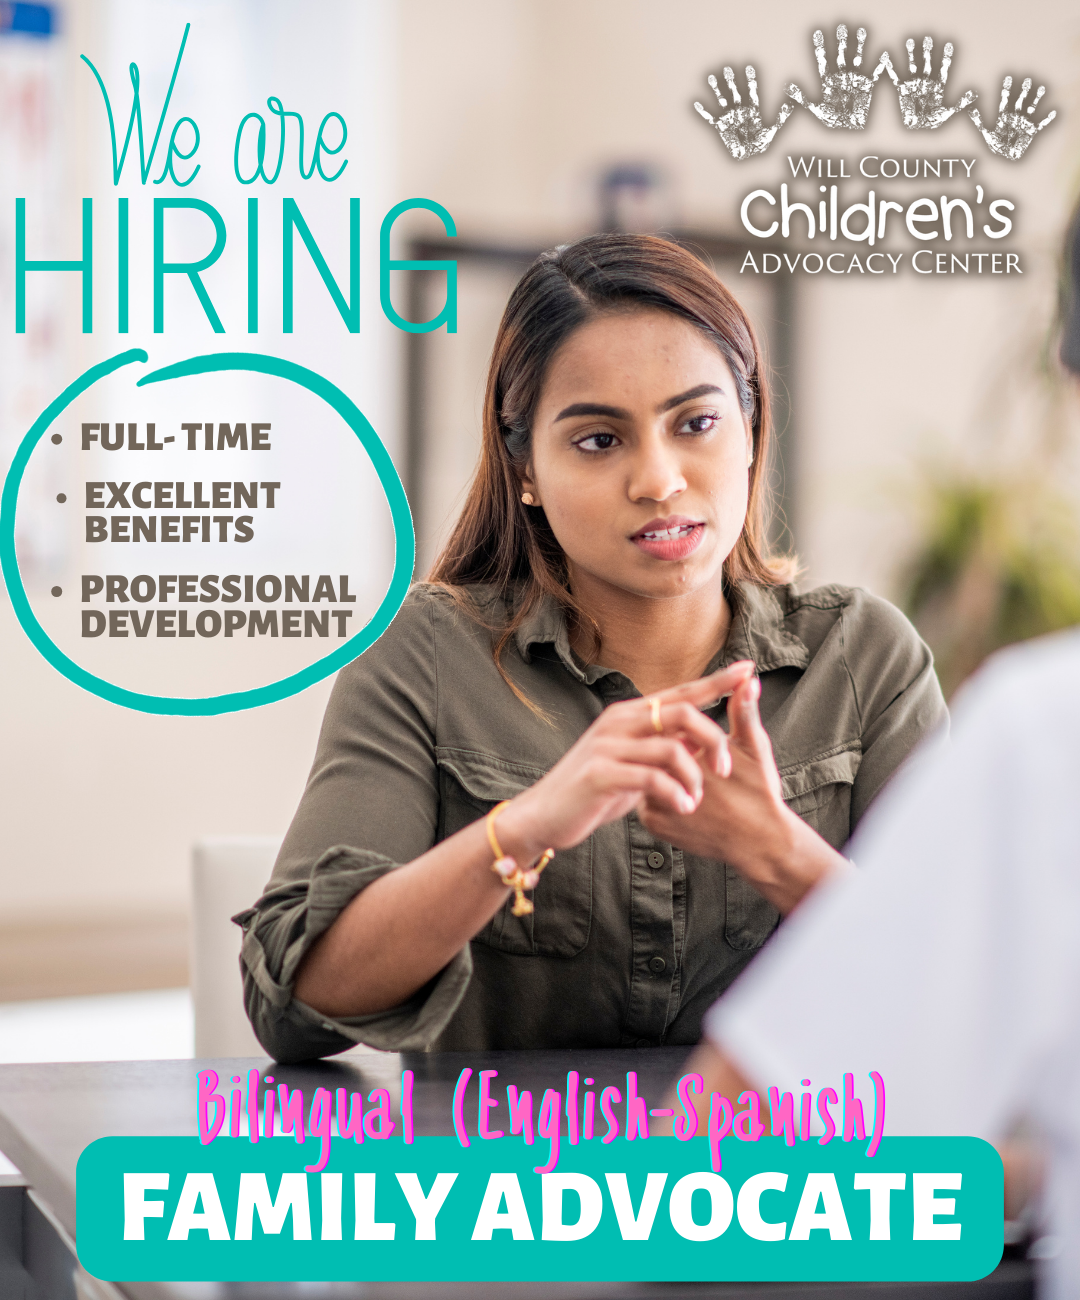 Bilingual Family Advocate We Are Hiring (1)